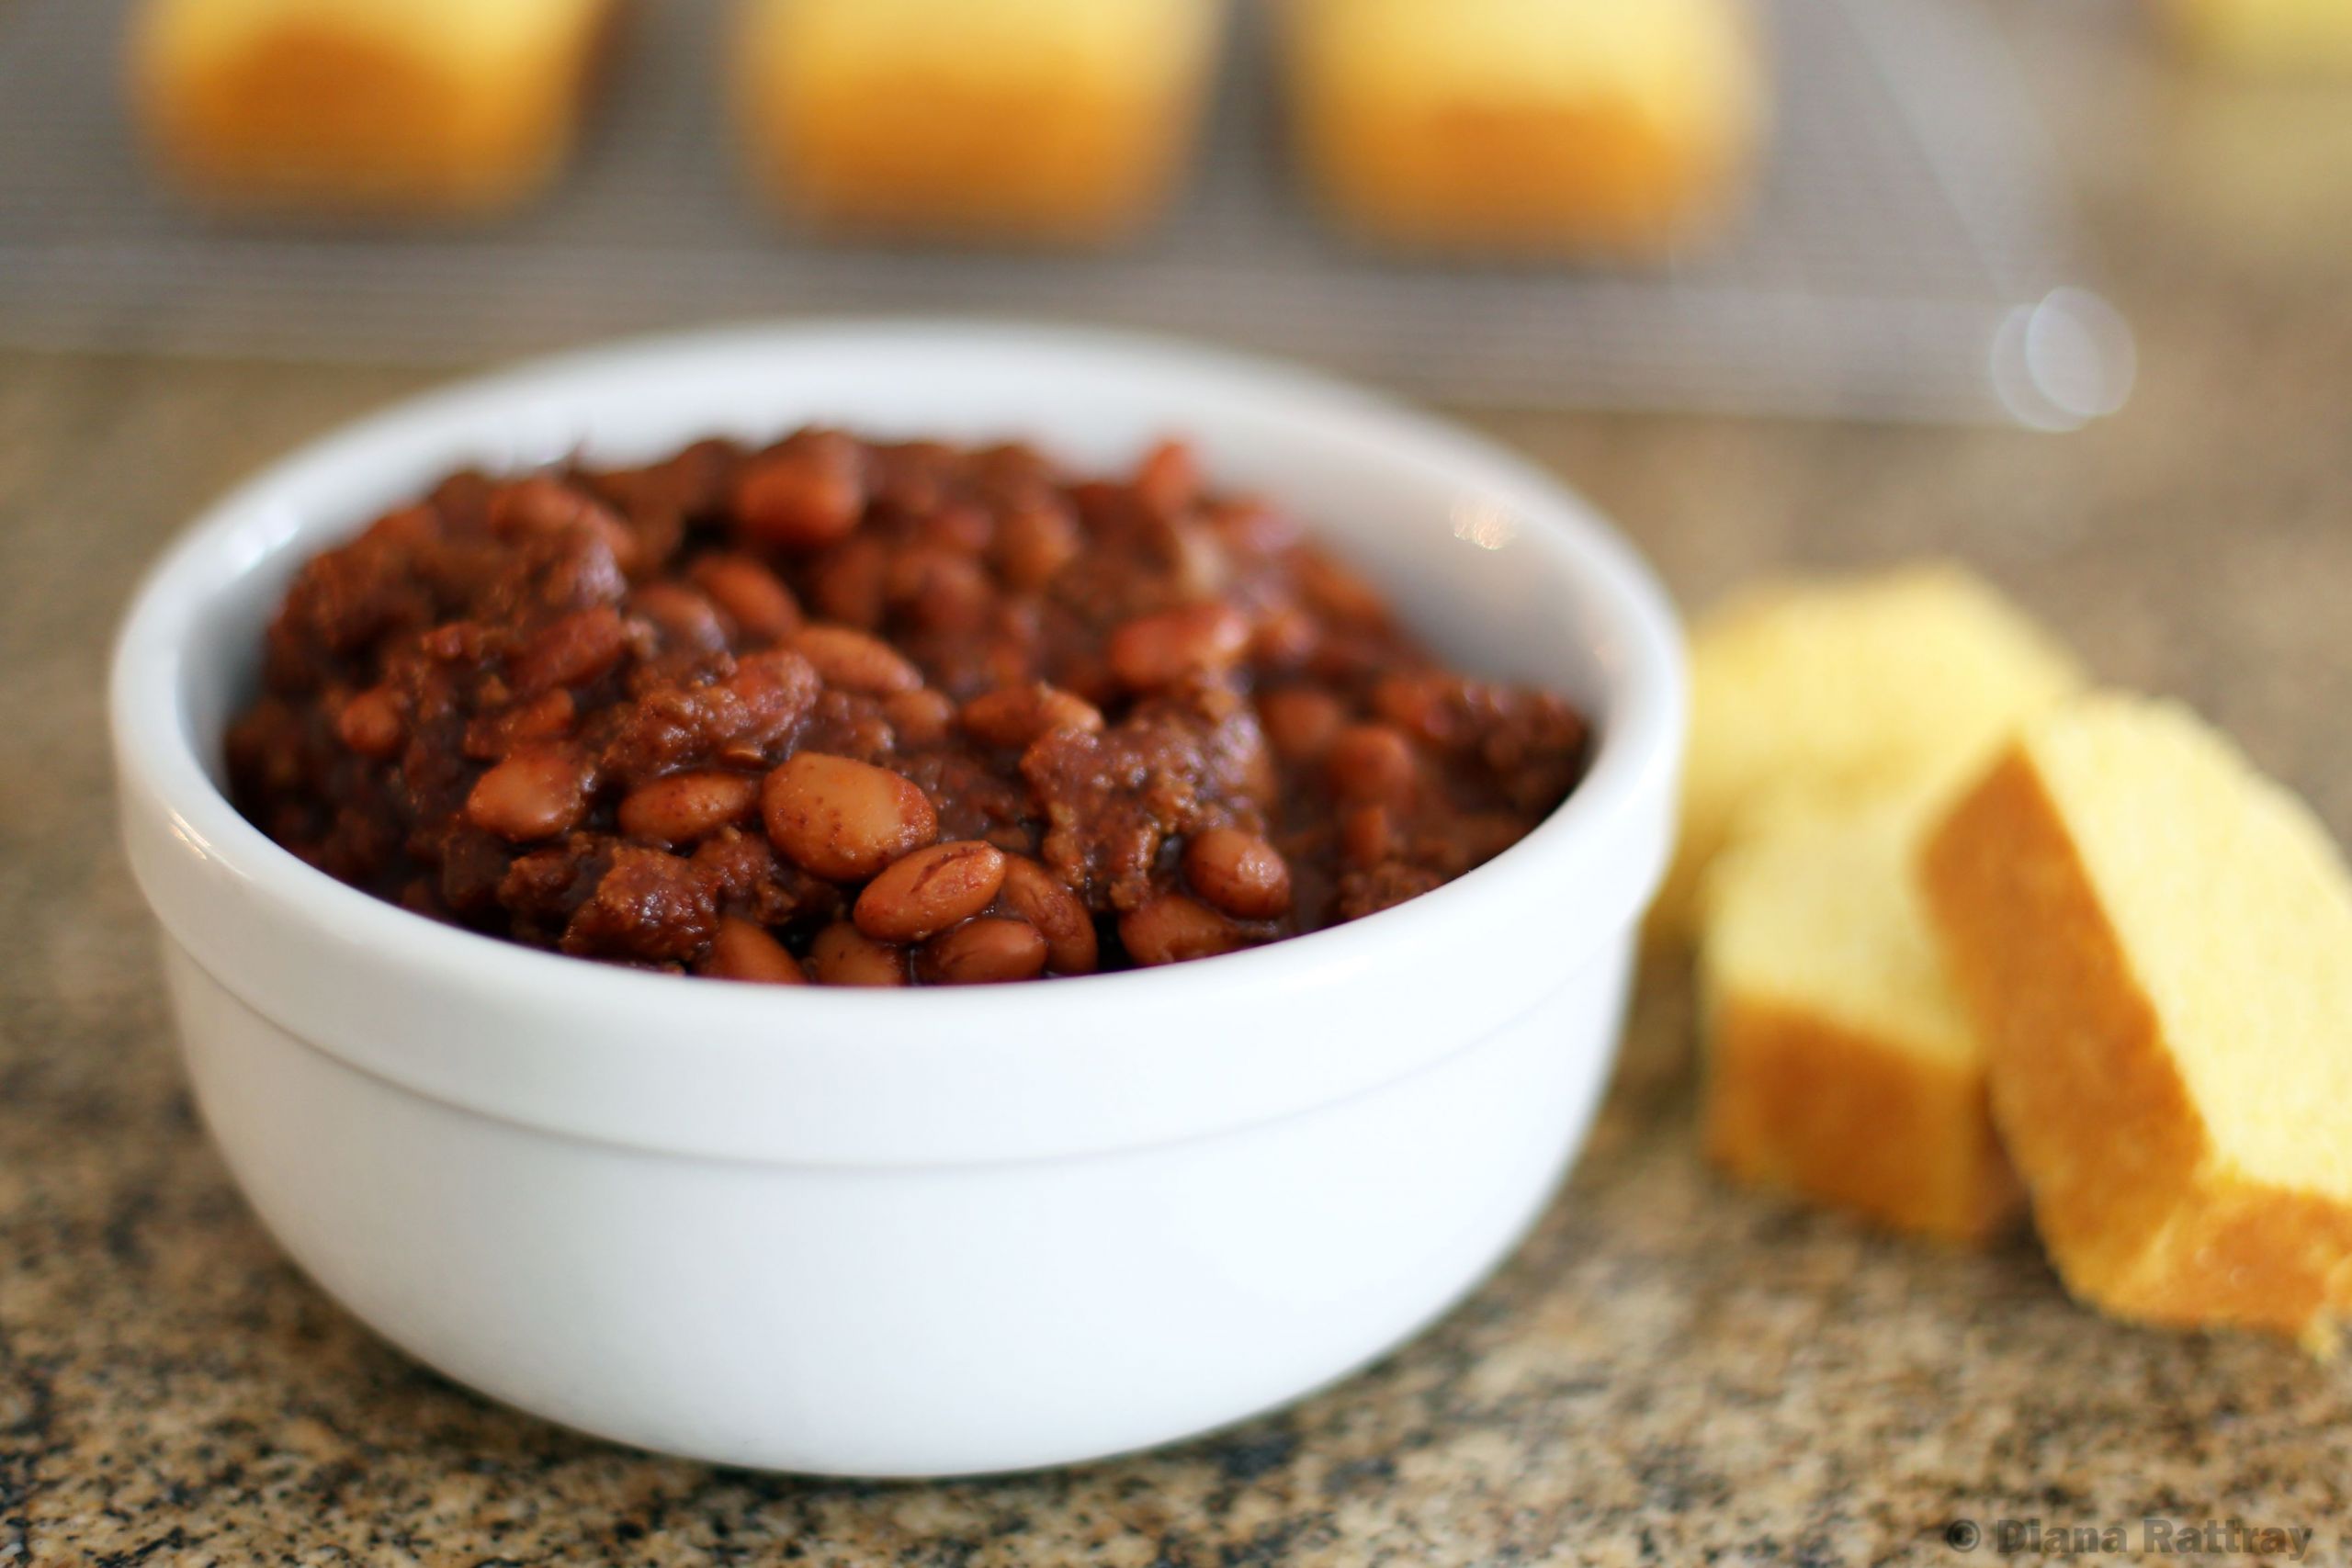 Pinto Beans And Ground Beef Recipe Slow Cooker
 Spicy Ground Beef and Pinto Bean Chili Recipe